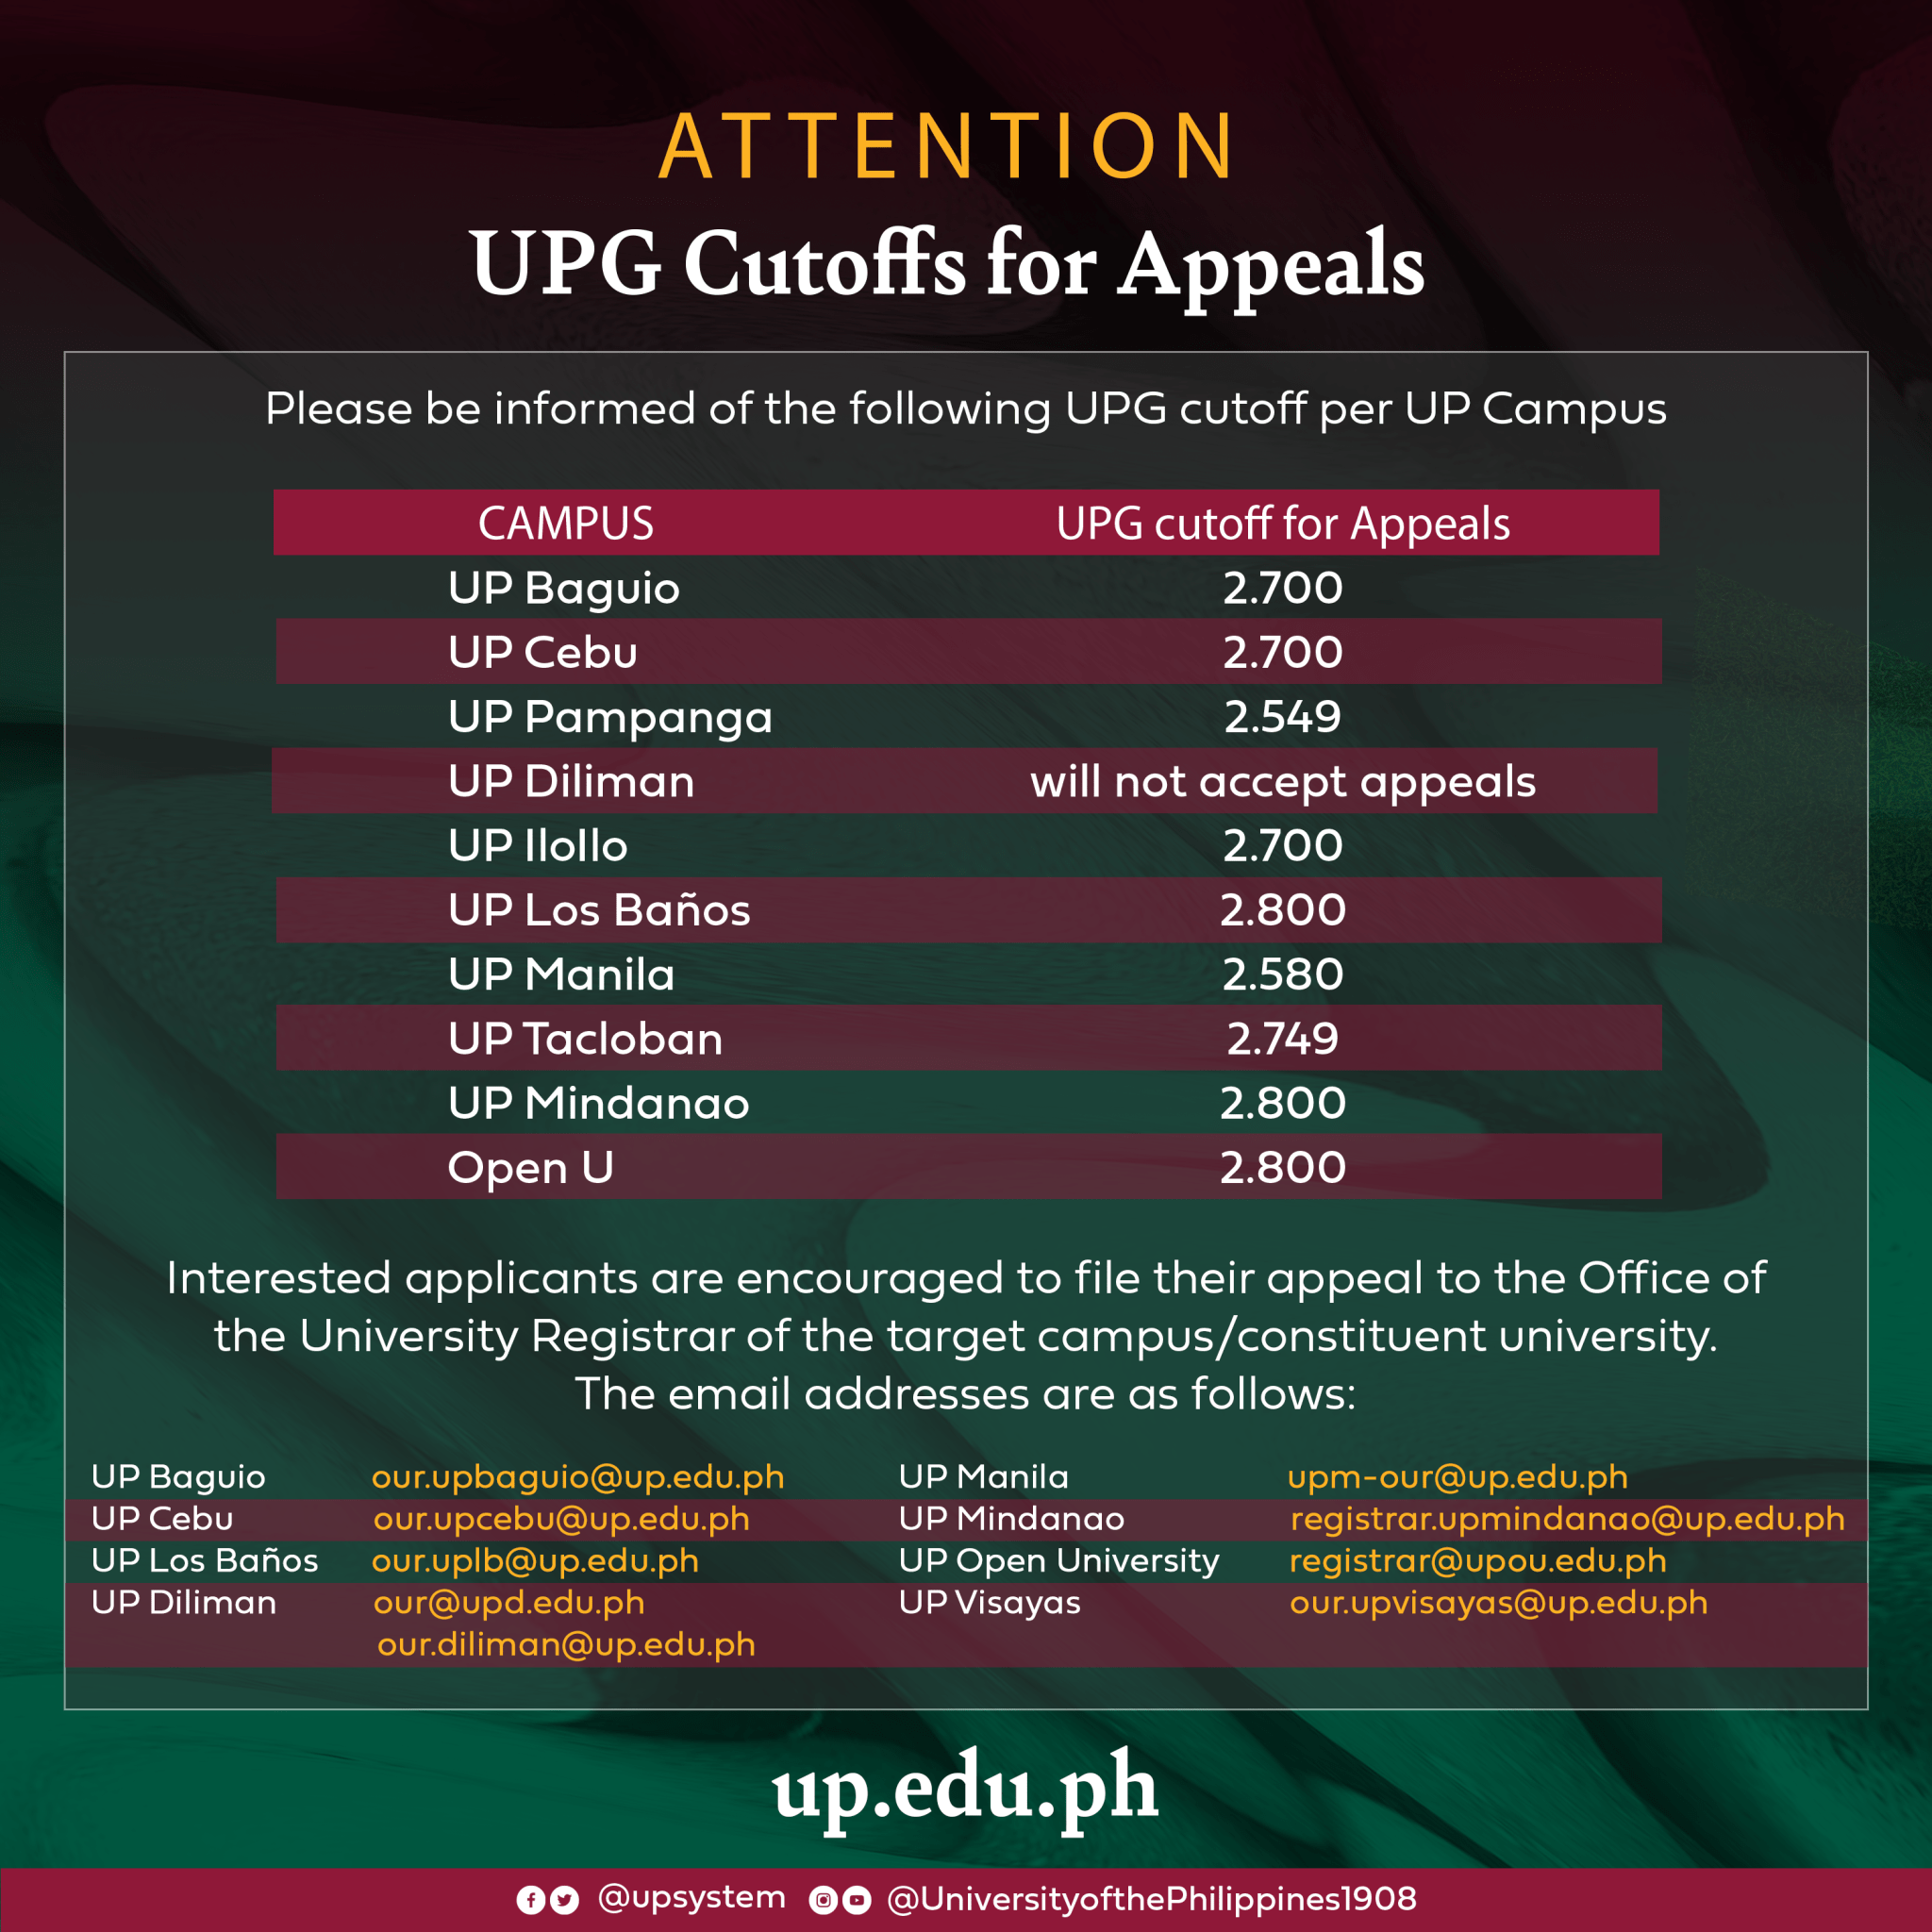 UP college applicants reminded of UPG cutoff for appeals  University